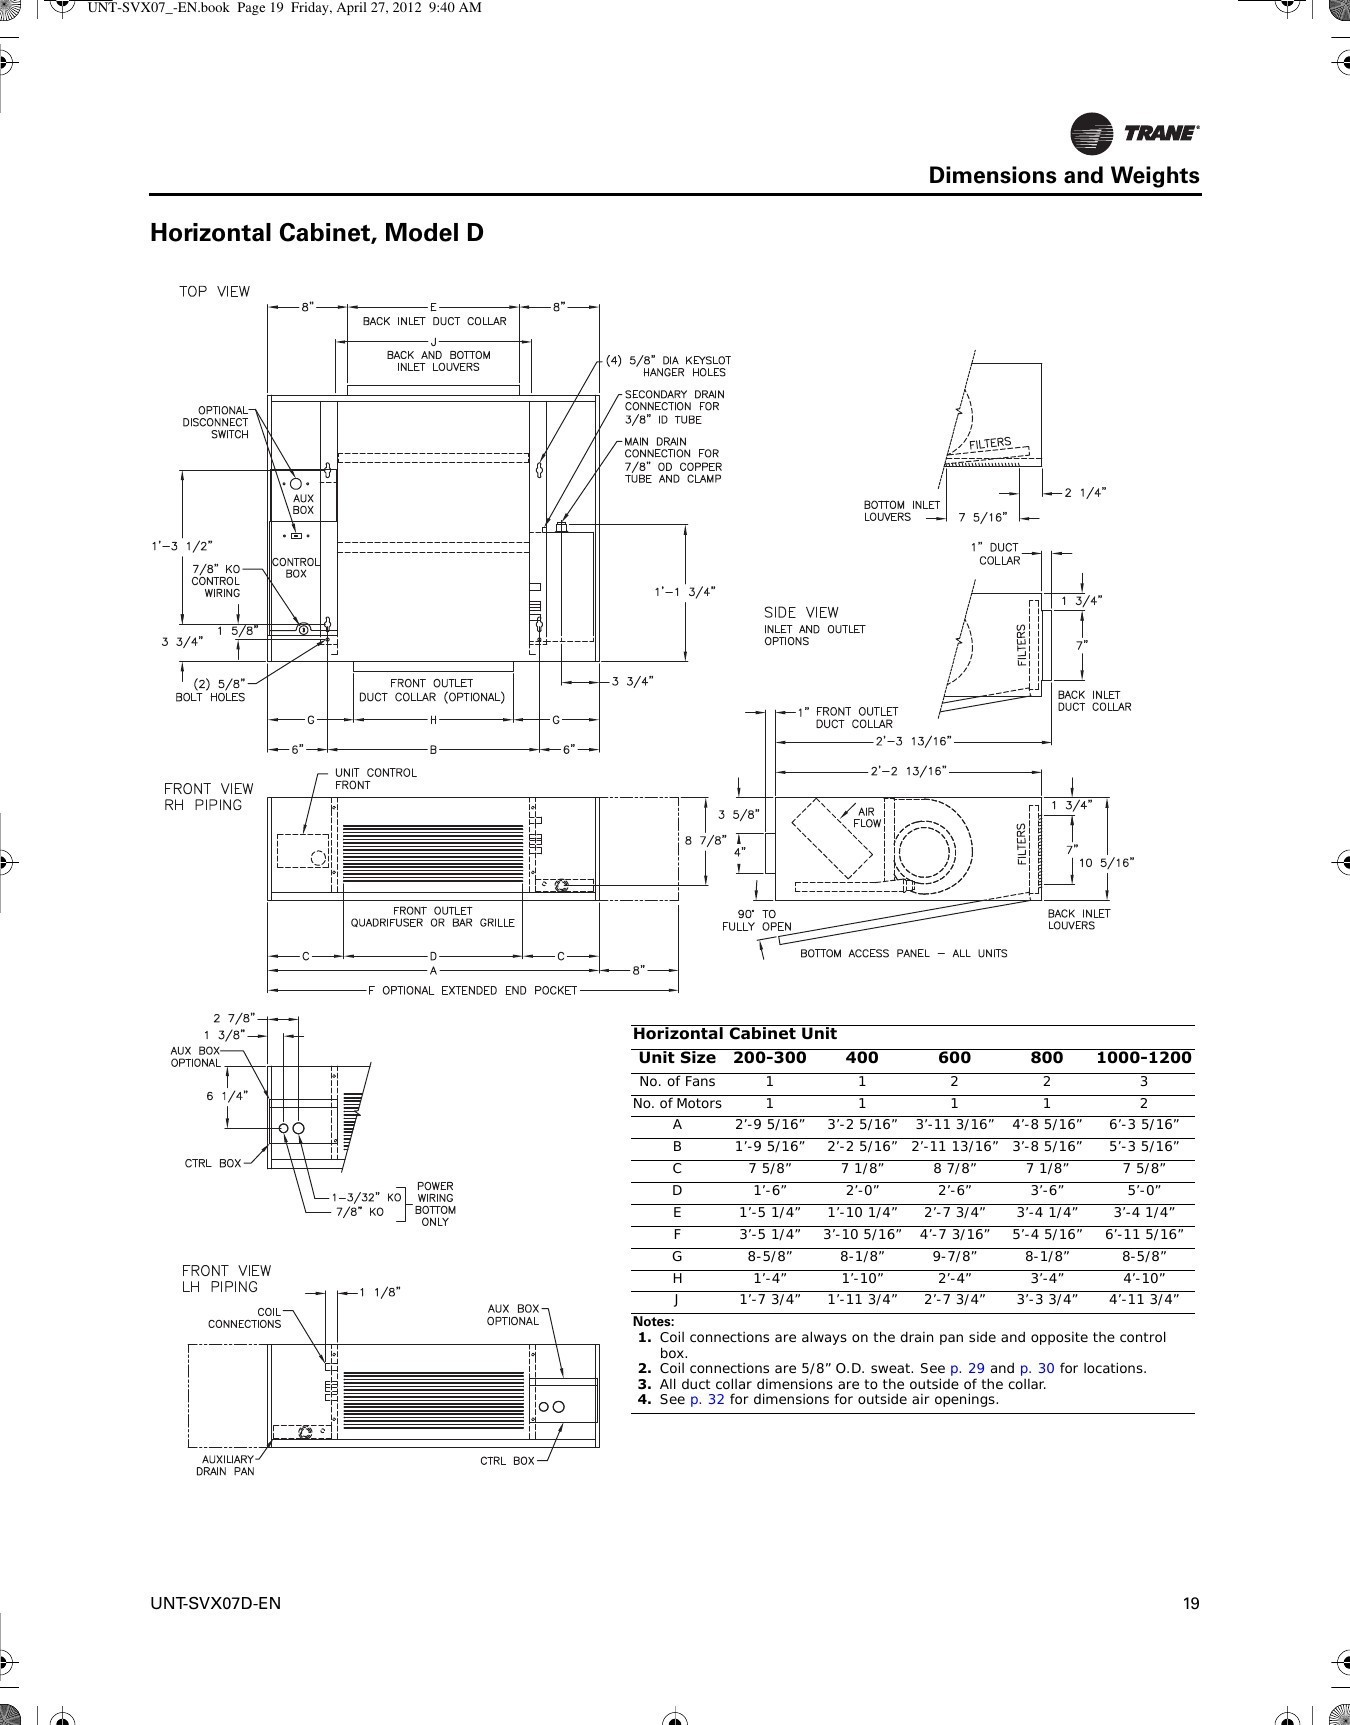 New Wiring Diagram For Honeywell Thermostat Rth3100c New Wiring Diagram For Honeywell Thermostat Rth3100c Yourproducthereco